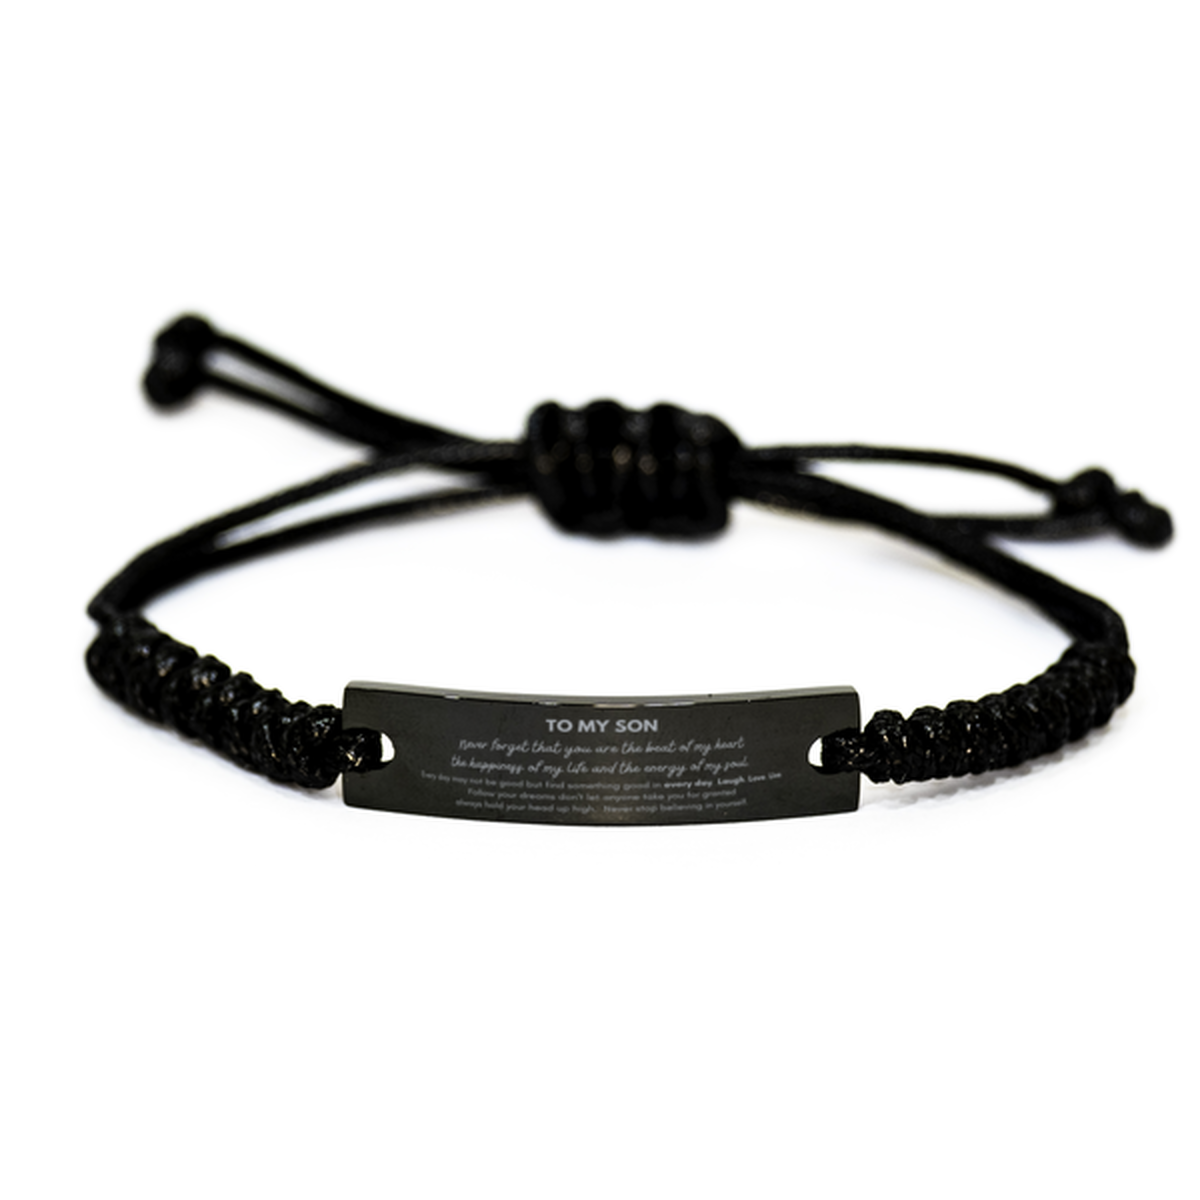 To My Son Bracelet Gifts, Christmas Son Black Rope Bracelet Present, Birthday Unique Motivational For Son, To My Son Never forget that you are the beat of my heart the happiness of my life and the energy of my soul